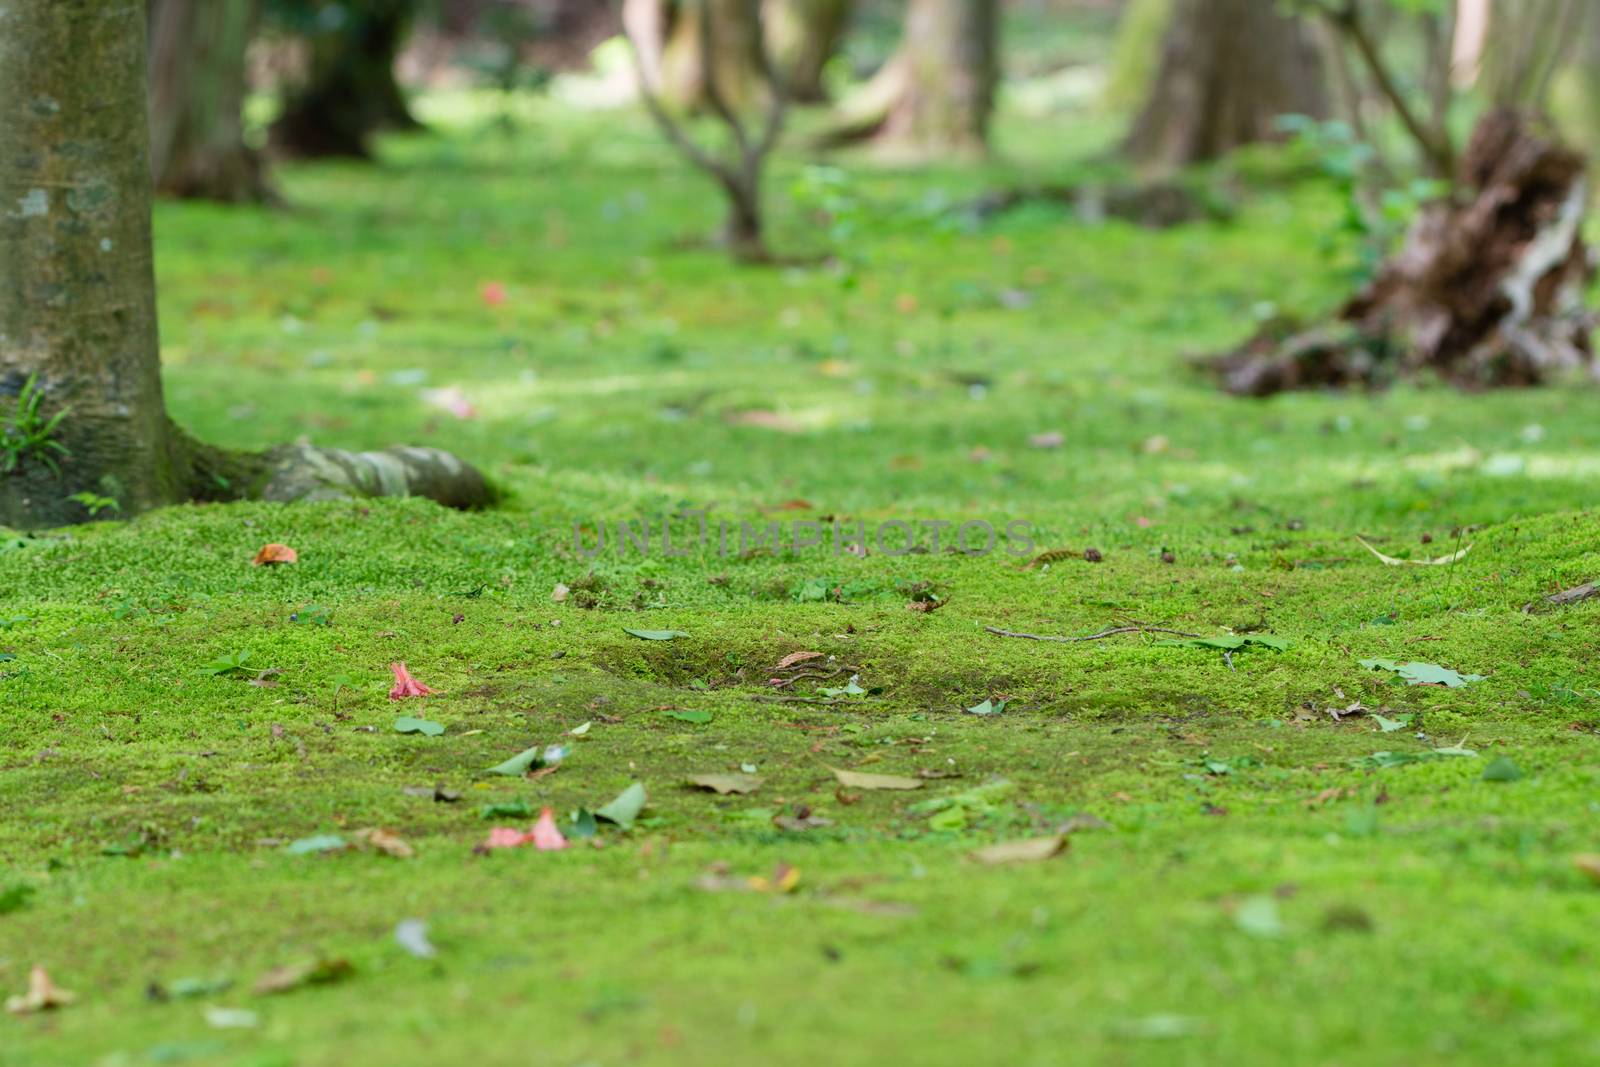 Moss covering smooth bumpy ground with some fallen leaves.